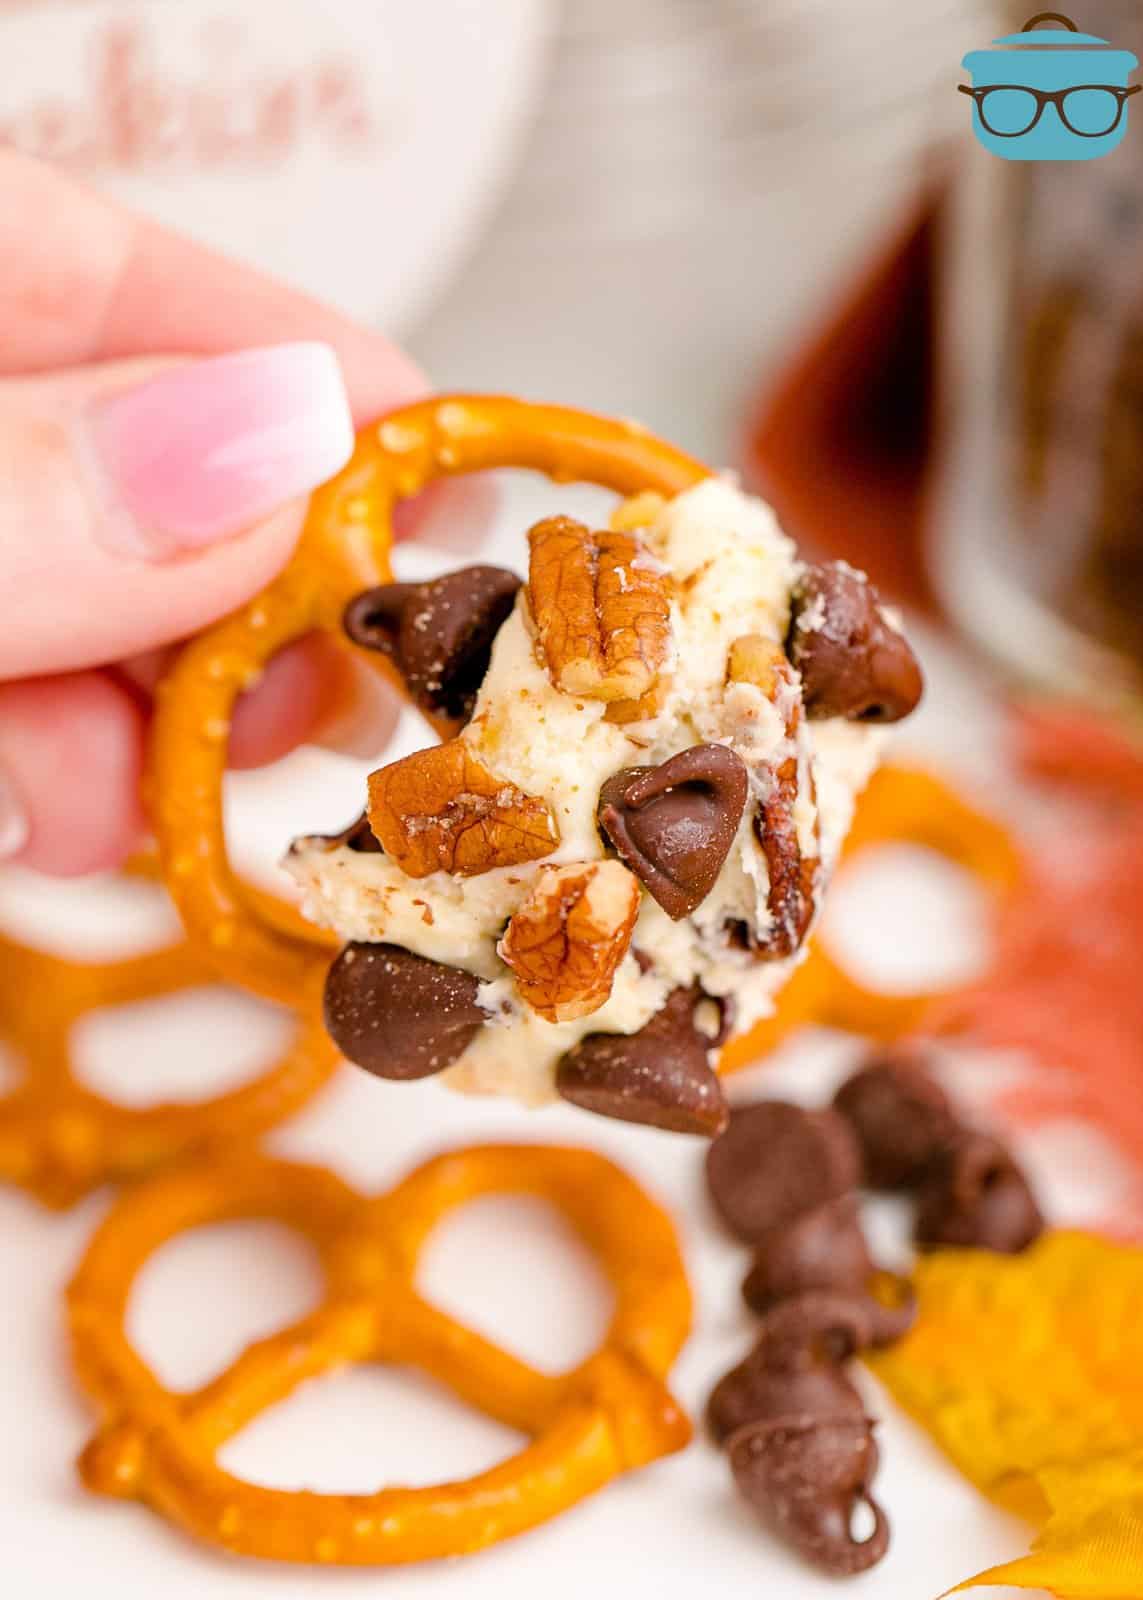 Hand holding up a pretzel that has been dipped into the Turkey Dessert Cheeseball.